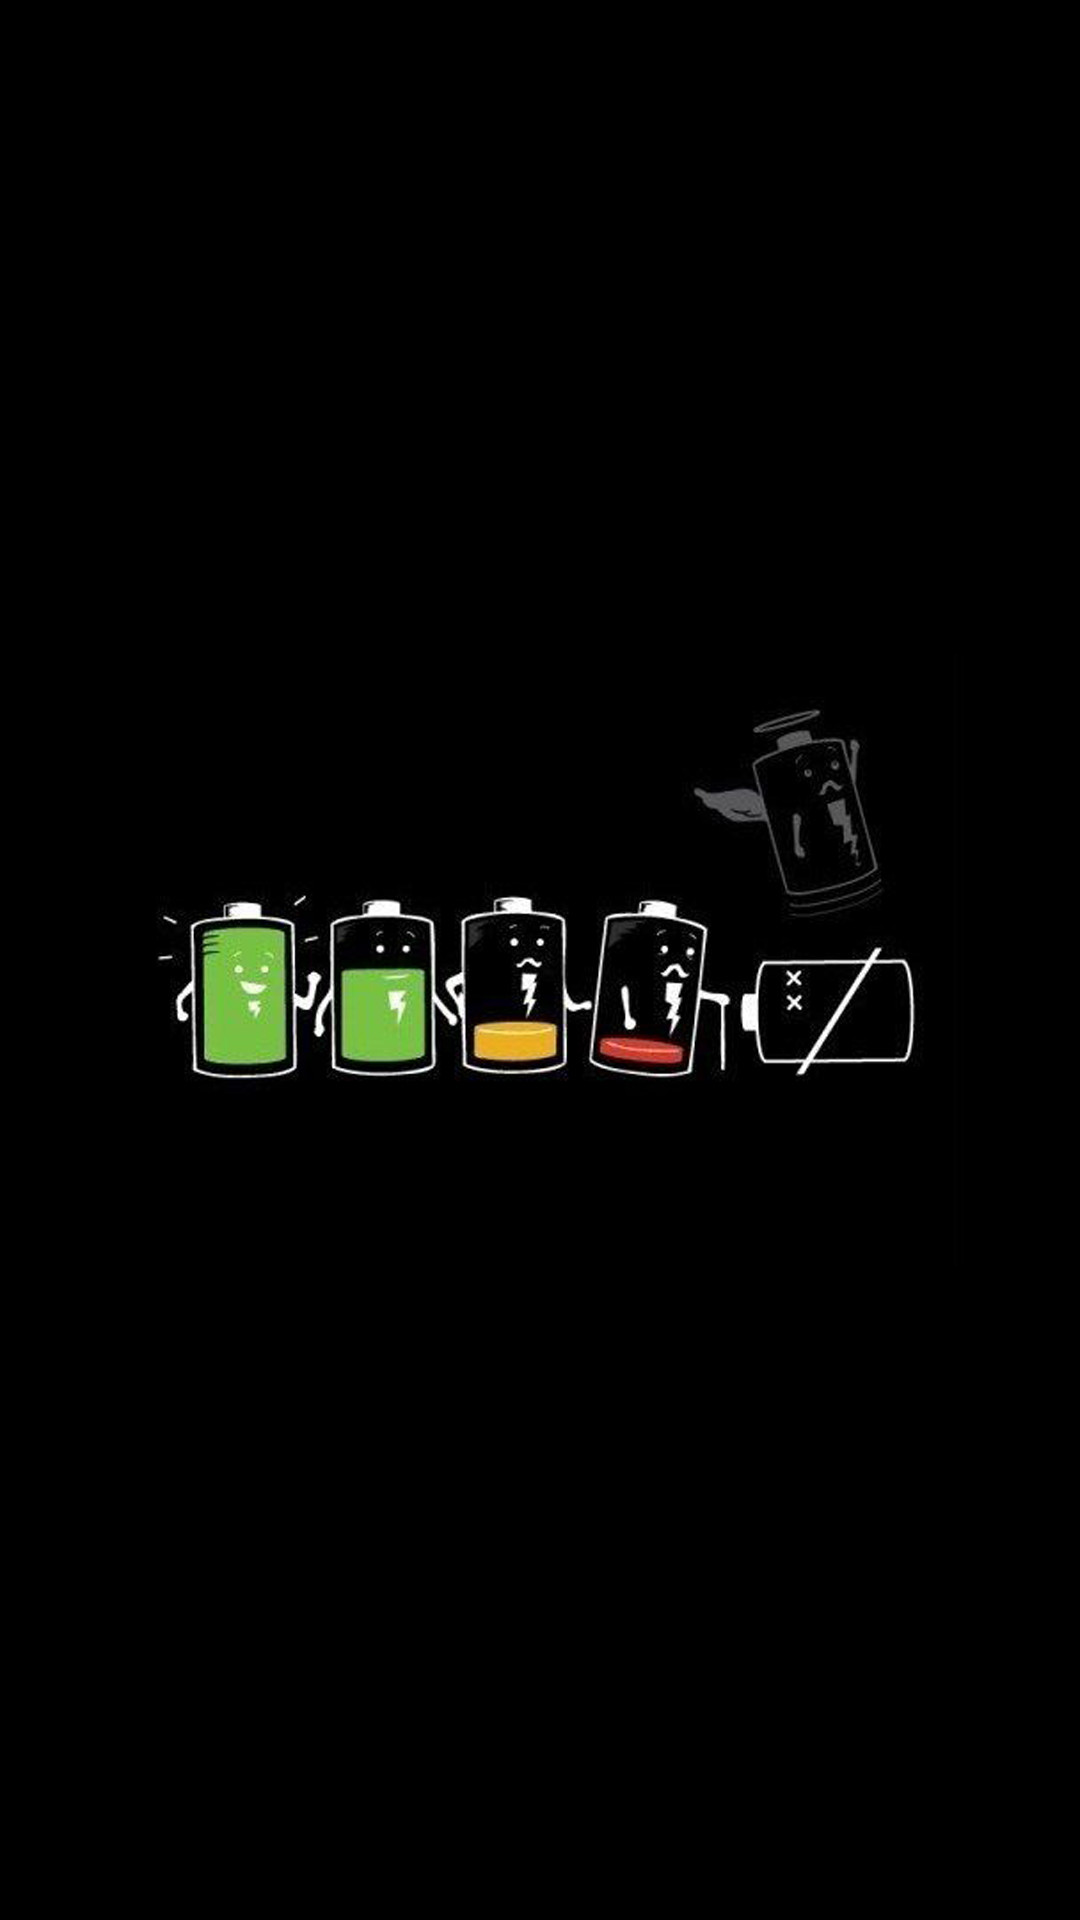 1080x1920 The Battery Life. Funny cartoon art iPhone wallpapers. Tap to see more  iPhone backgrounds